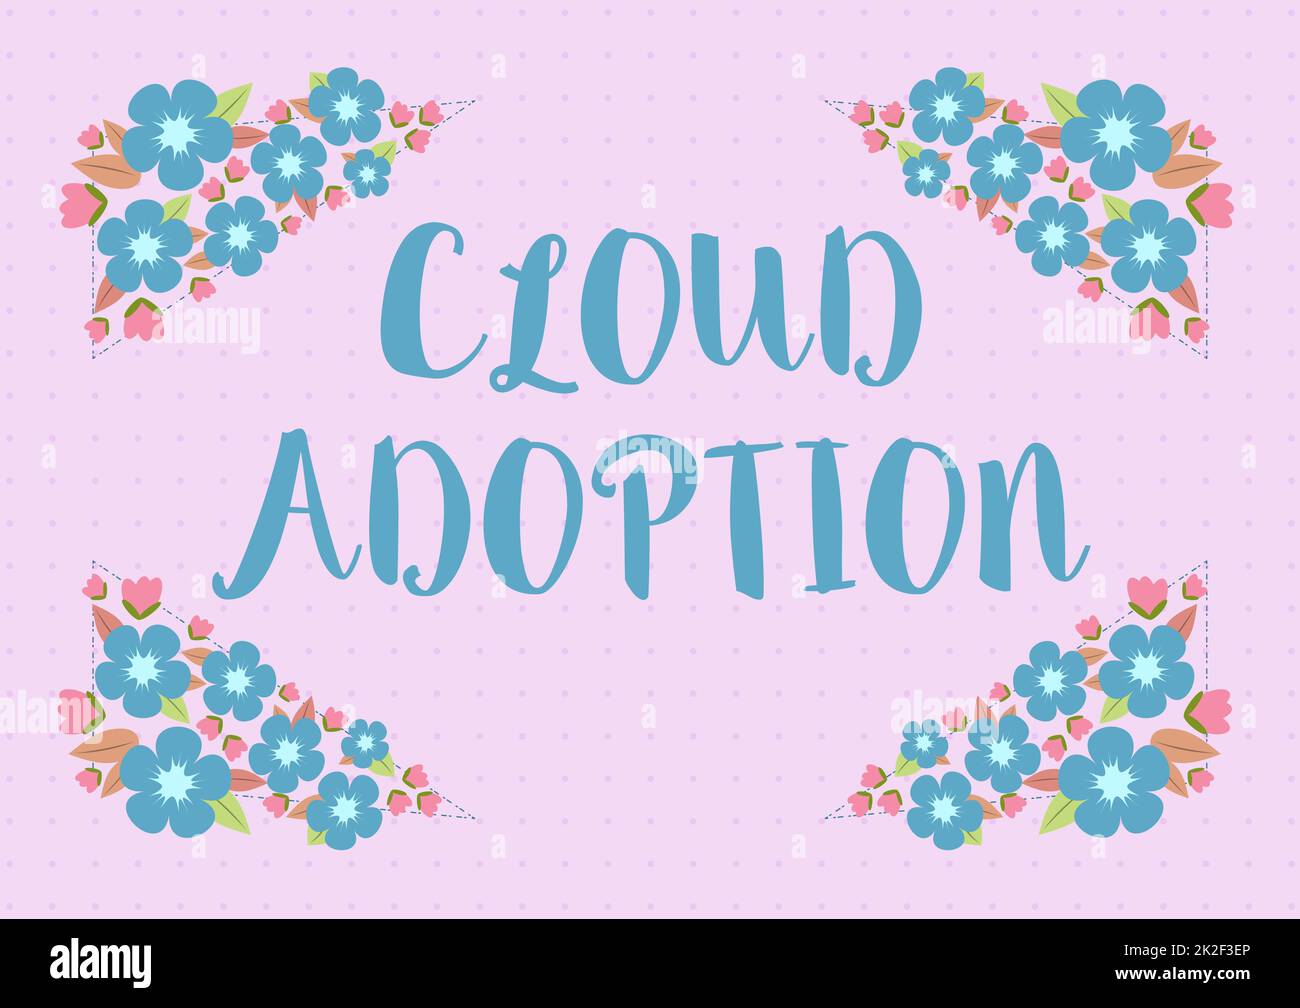 Inspiration showing sign Cloud Adoption. Business concept strategic move by organisations of reducing cost and risk Blank Frame Decorated With Abstract Modernized Forms Flowers And Foliage. Stock Photo